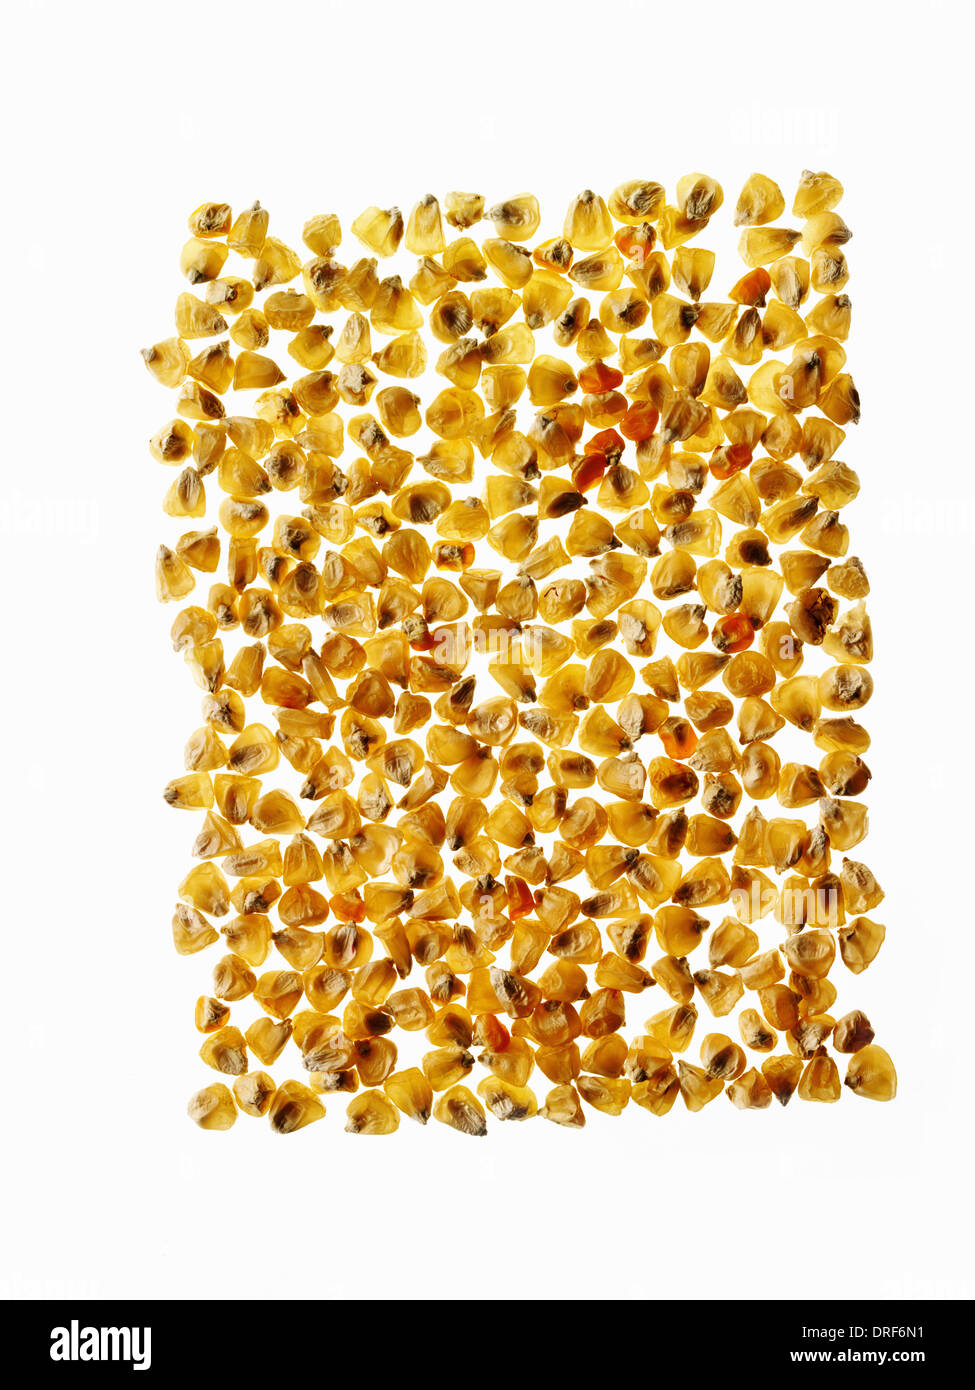 group of corn maize kernels arranged in pattern Stock Photo